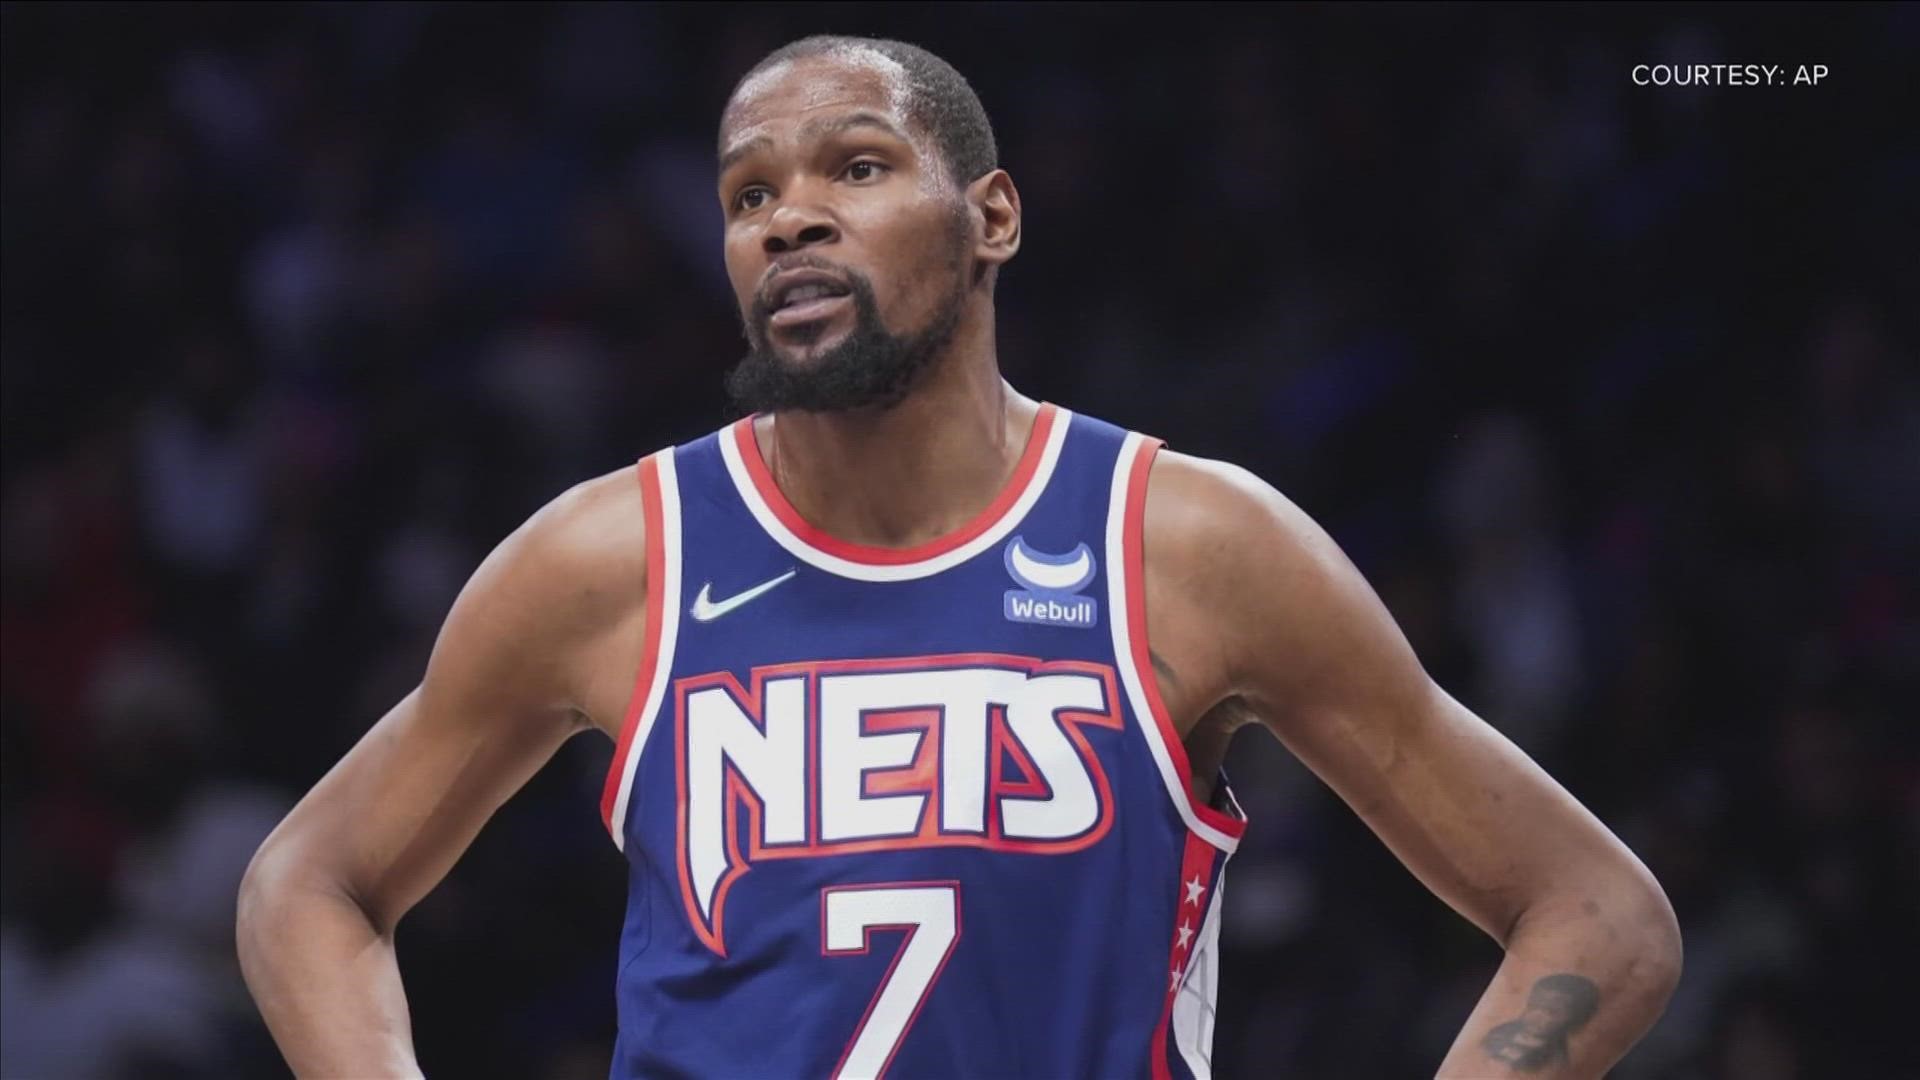 The Grizzlies join a slew of teams reportedly interested in trading for Kevin Durant following his request to trade out of the Brooklyn Nets earlier this year.